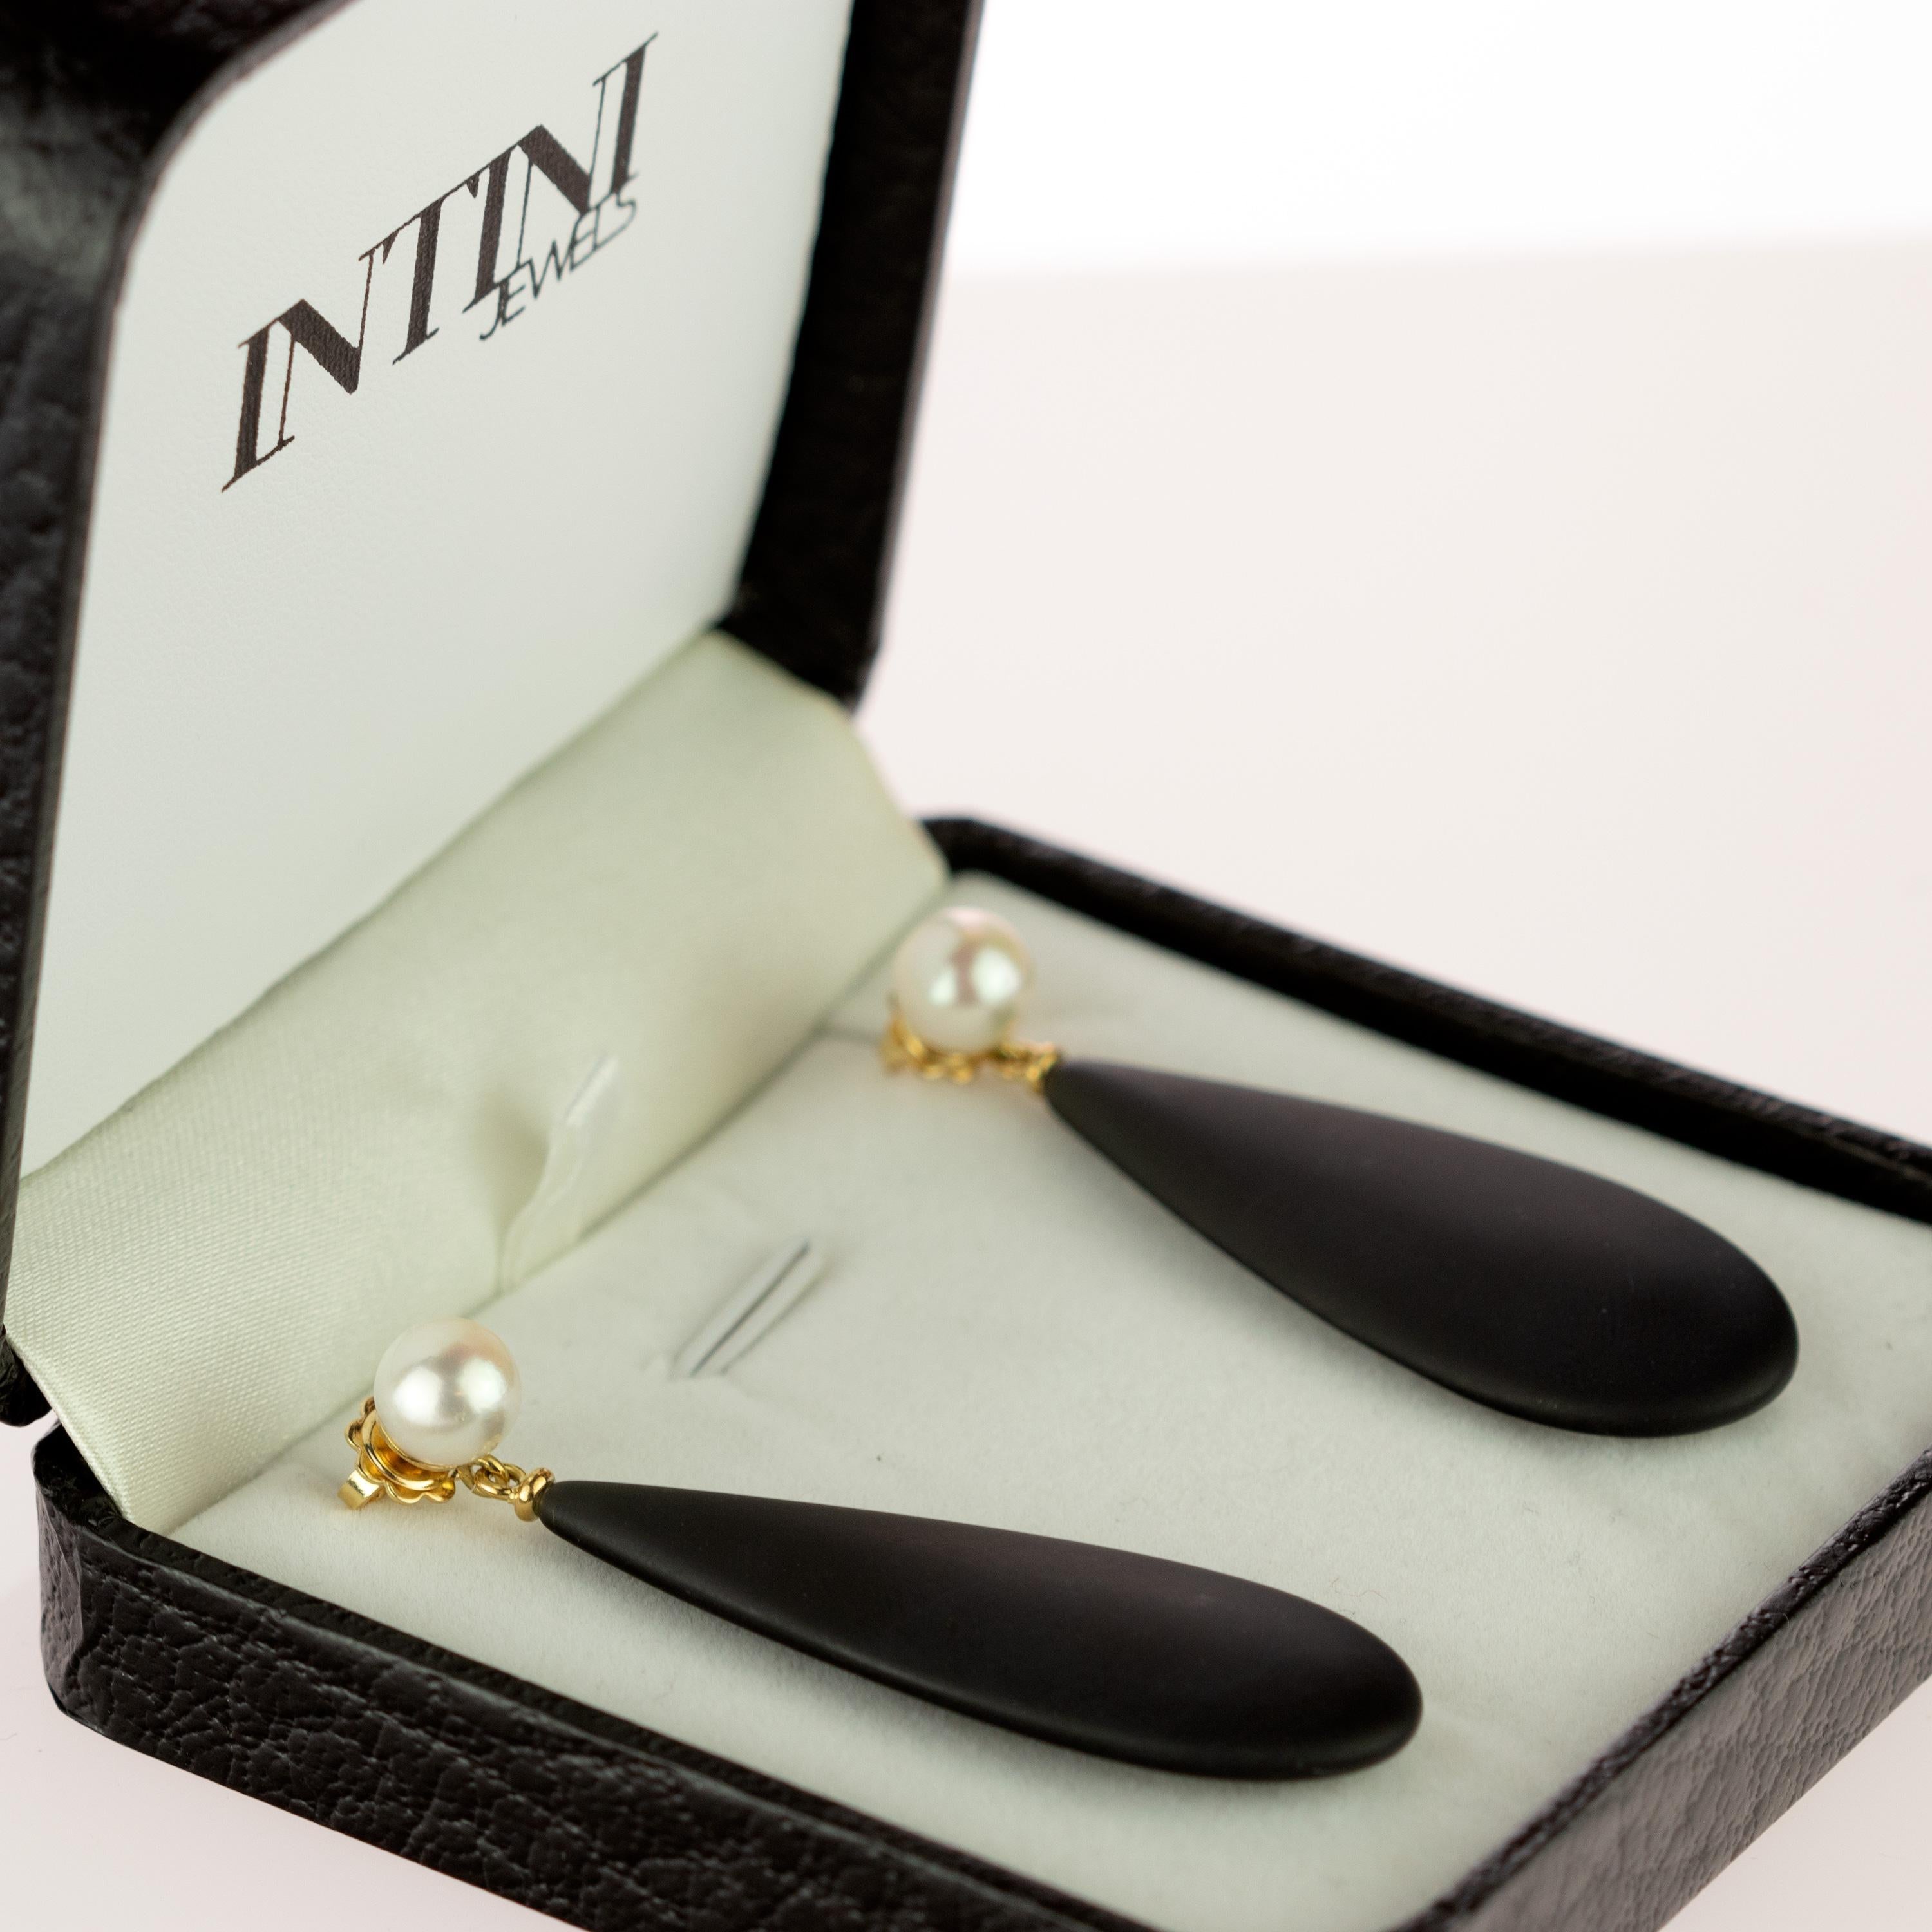 Crafted earrings of natural pearls with an stunning black agate pear teardrop design that combine voluminous round shapes with a matte black color. Resulting in flat, free-spirited pieces with a charming elegance. Held by 18 karat yellow gold that